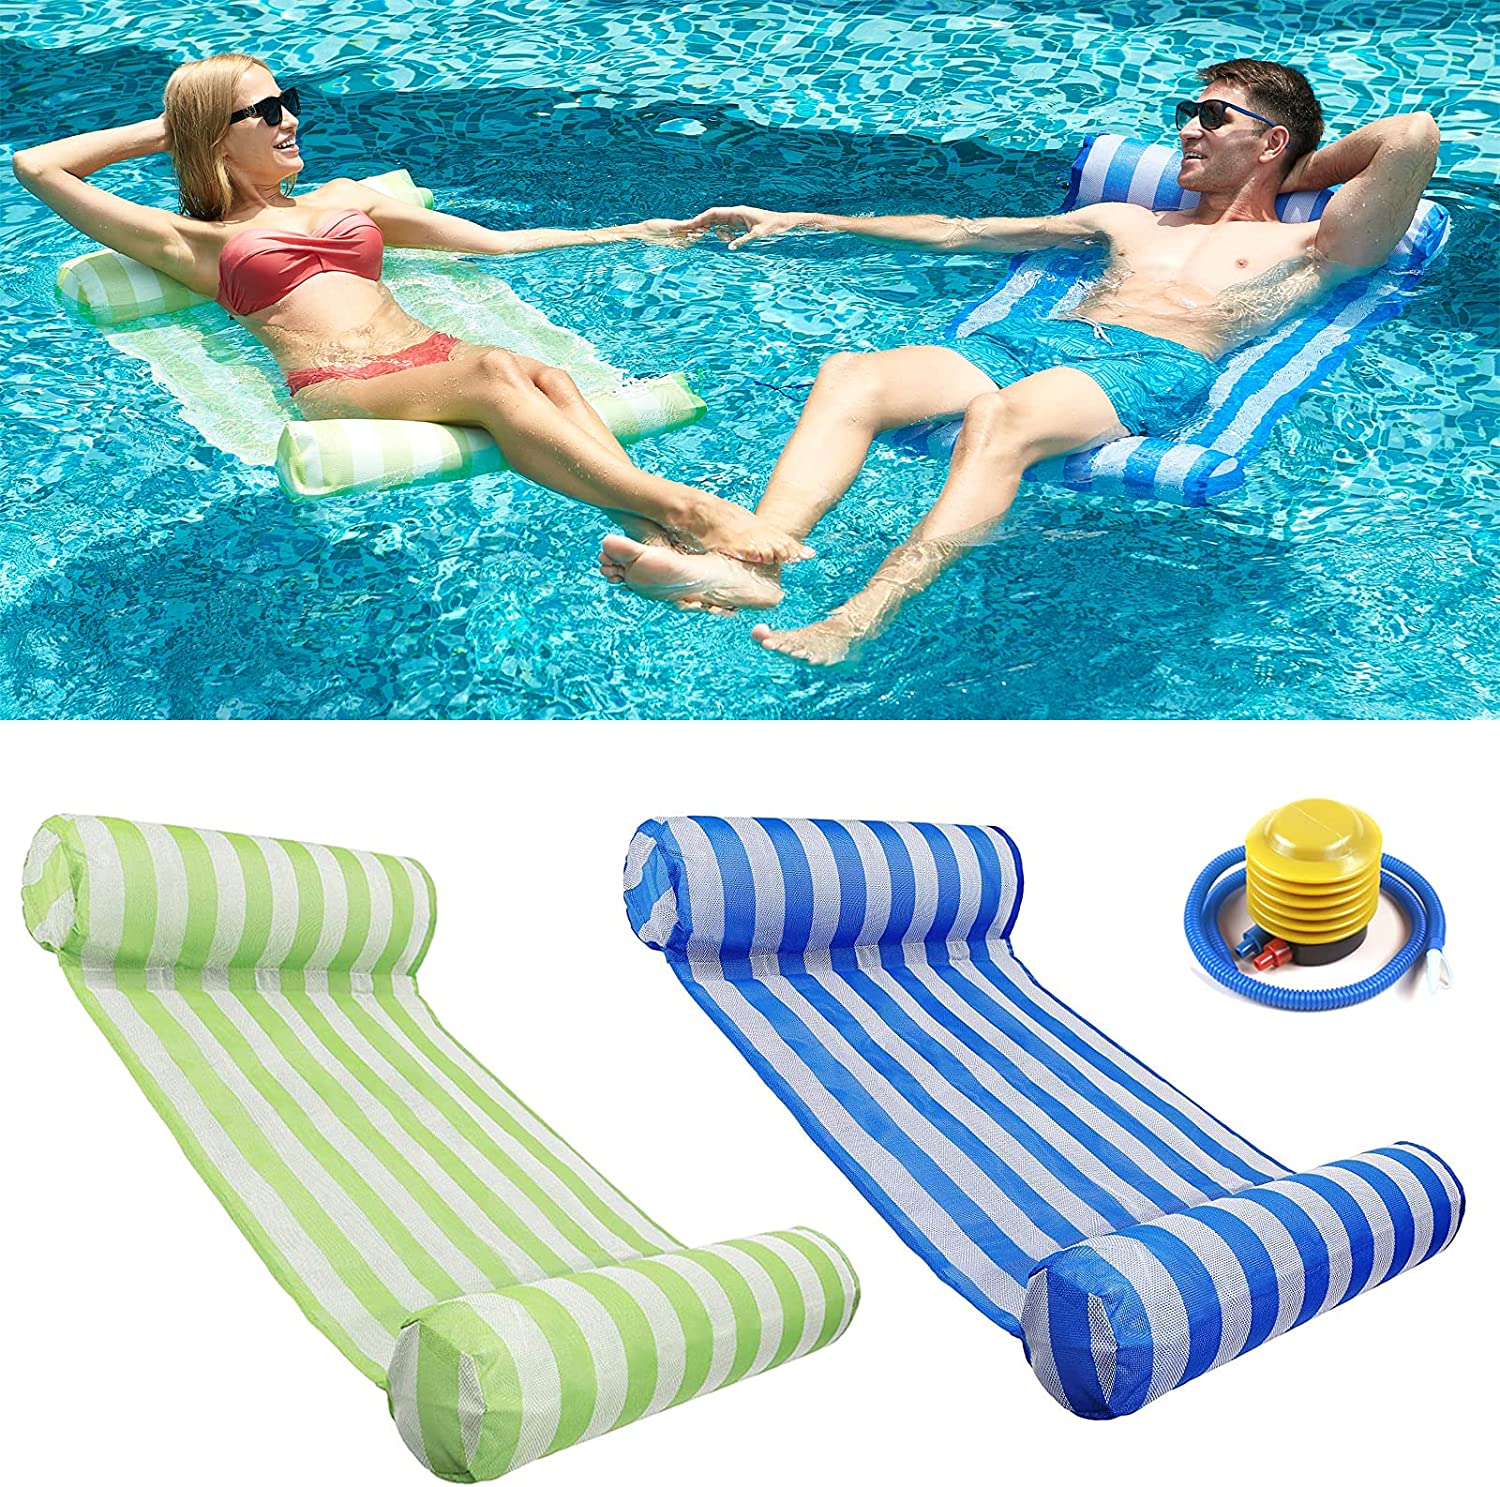 RACPNEL All-Weather Fabric Multi-Purpose Pool Floats, 2-Pack